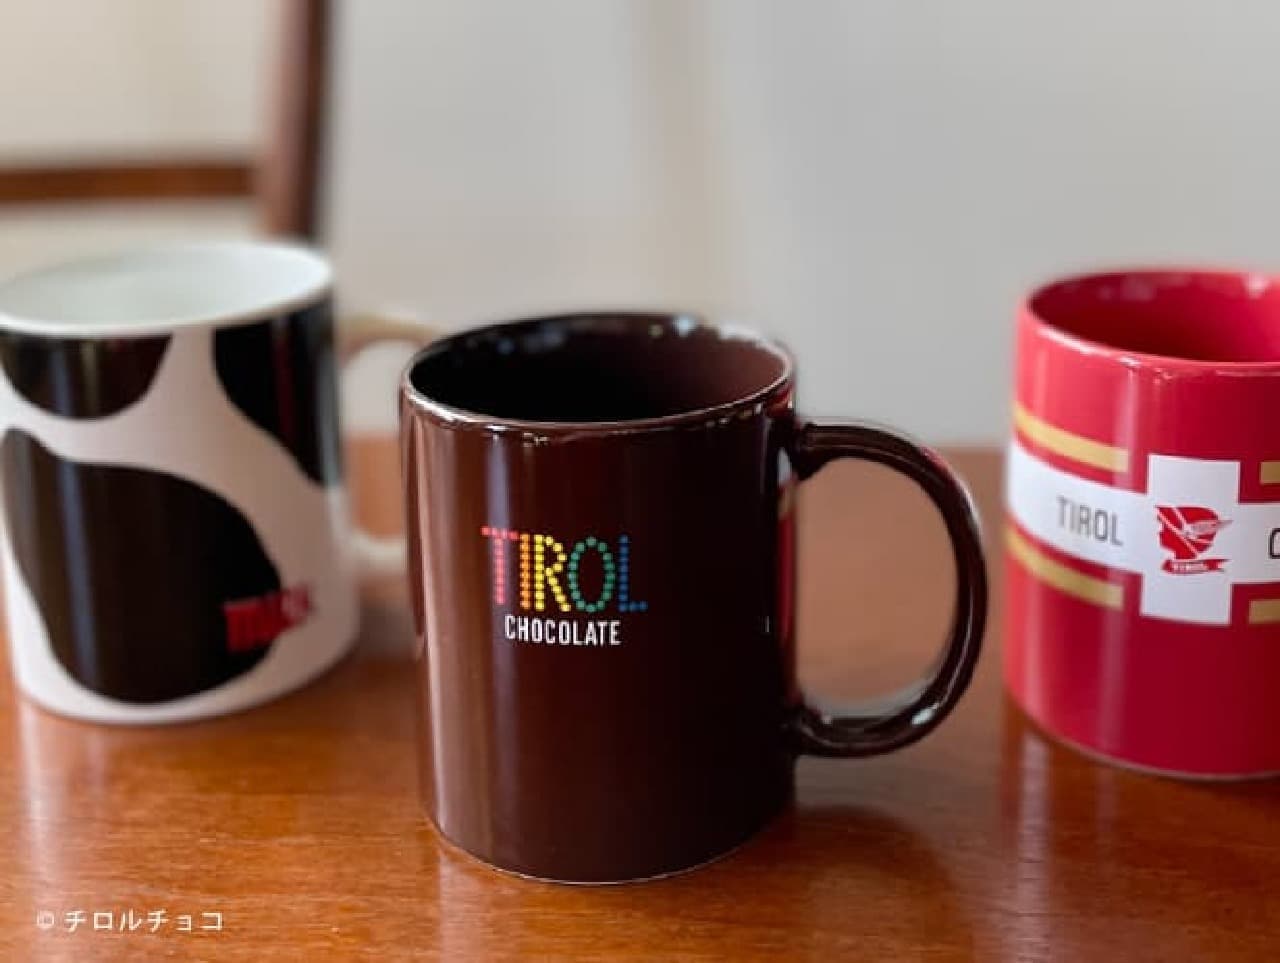 212 Kitchen store x Tyrolean chocolate collaboration --Long-selling "Coffee Nougat" in a mug